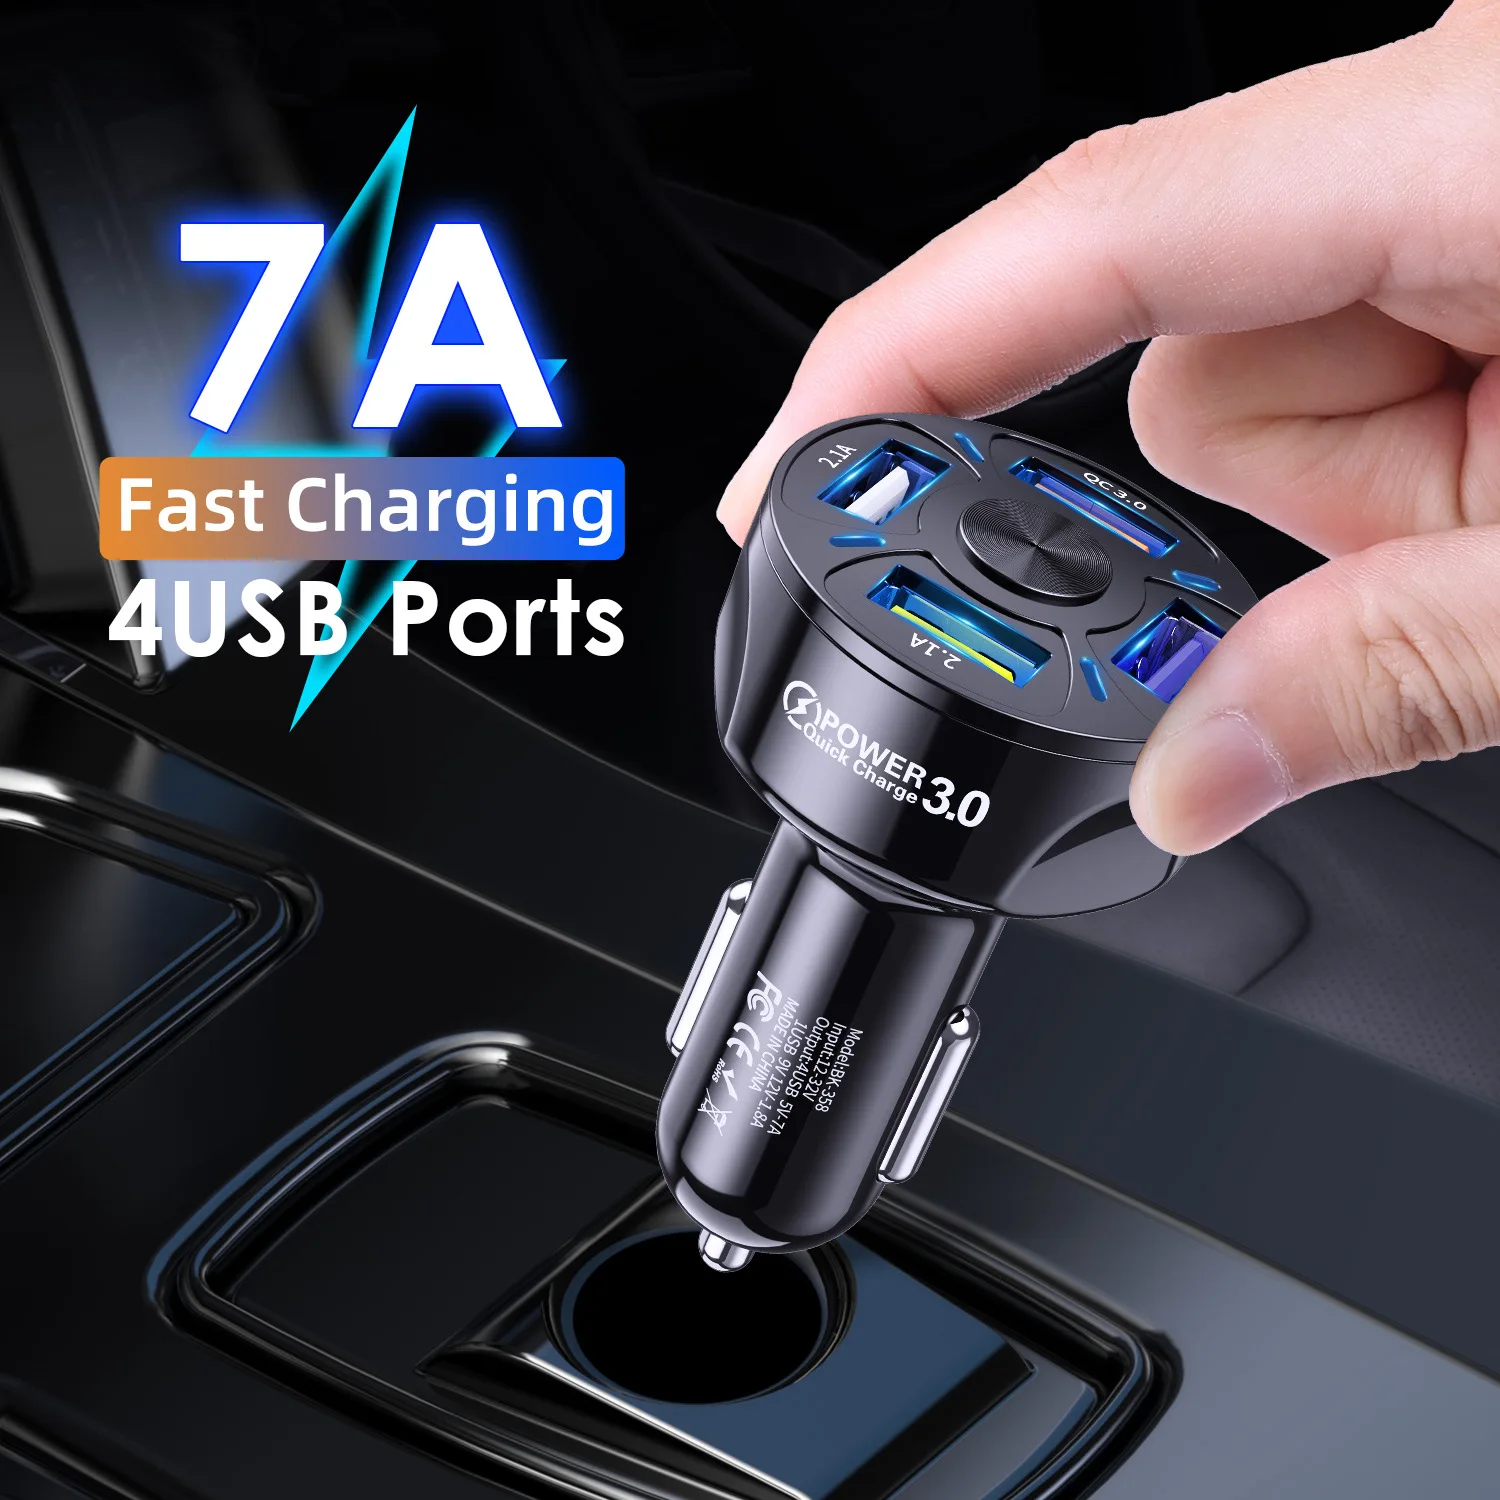 New USB Car Charge Electronics Quick Usb Socket Auto Elektronica Accessoi Fast Charging For IPhone Mobile Phone Charger Adapter